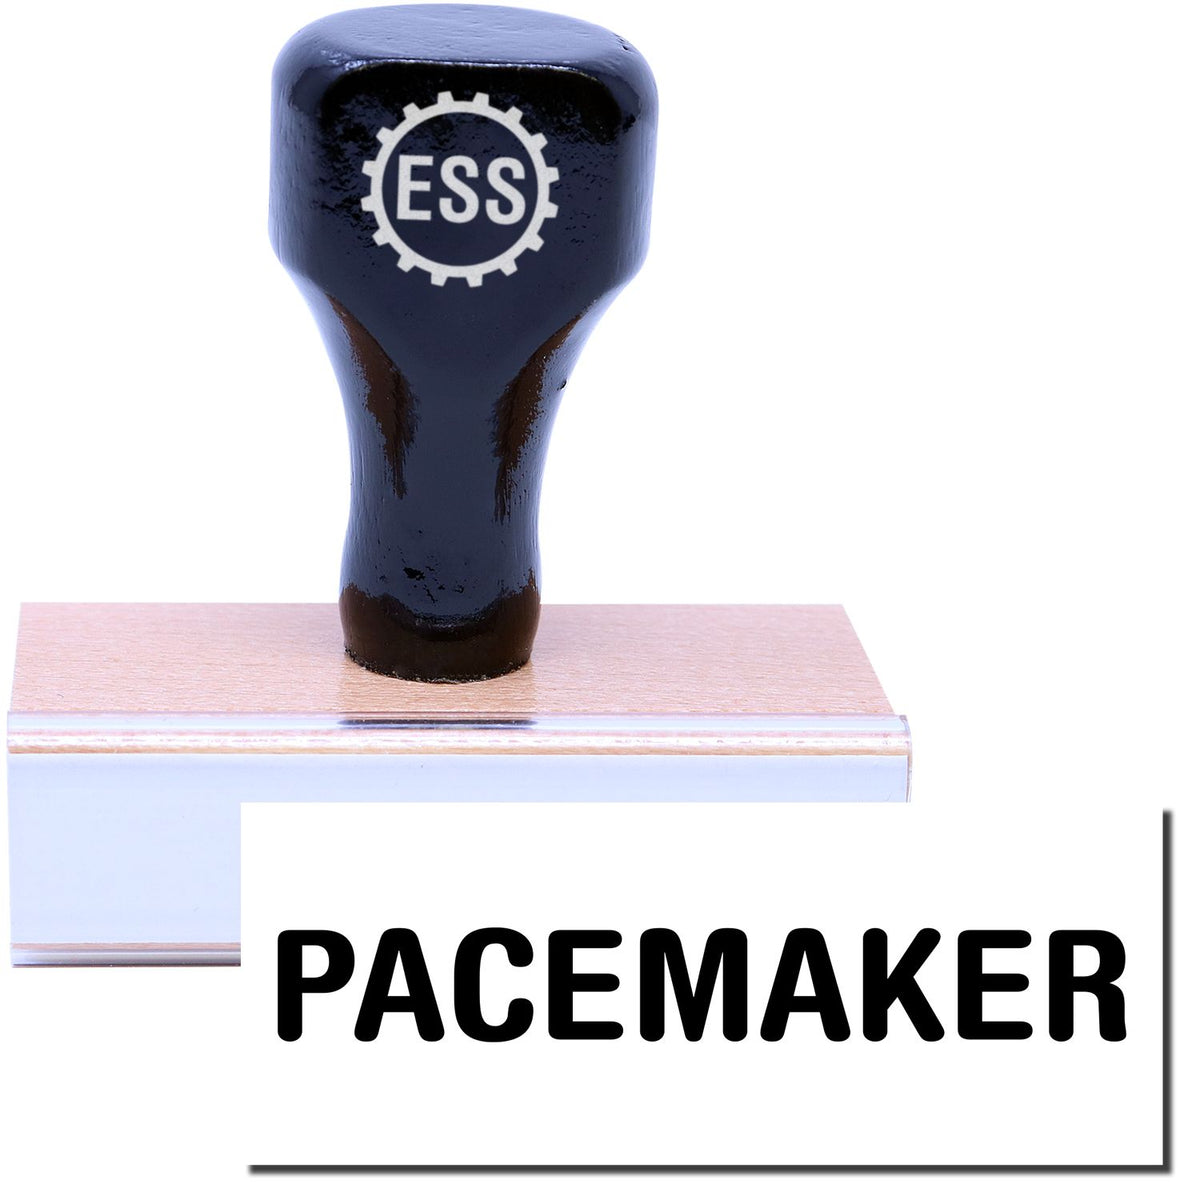 A stock office rubber stamp with a stamped image showing how the text &quot;PACEMAKER&quot; in a large font is displayed after stamping.